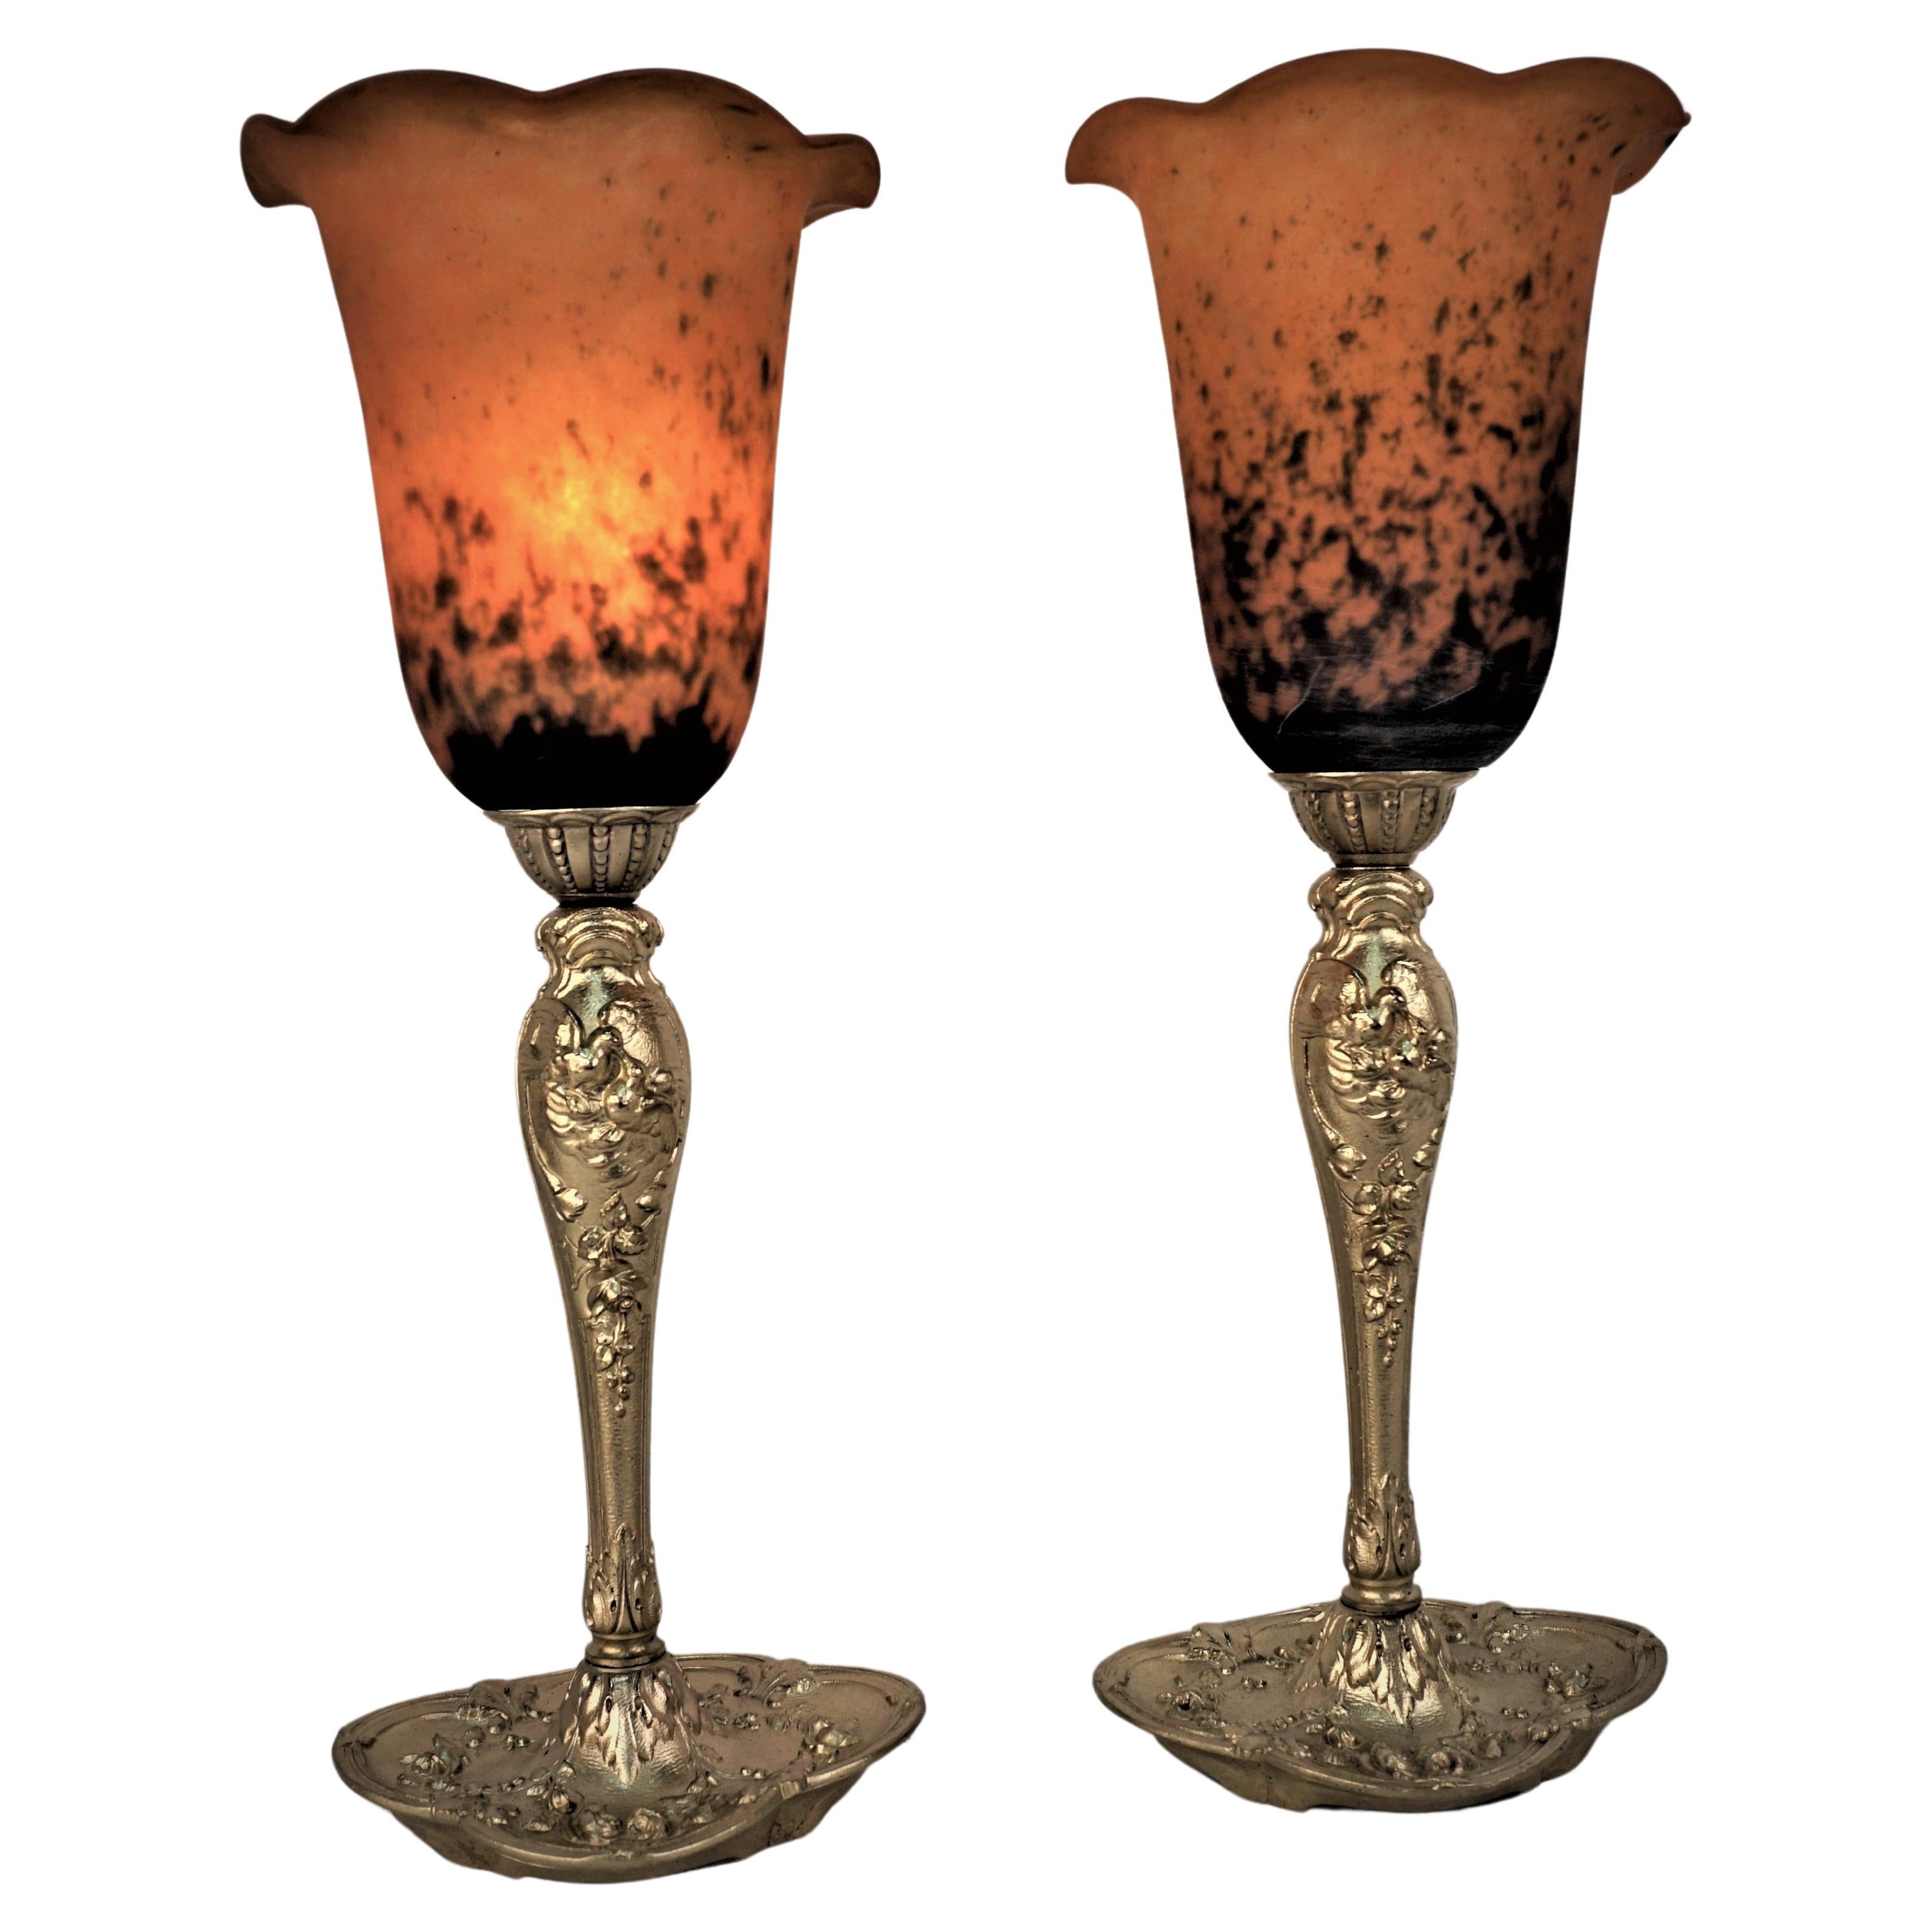 Pair of Hand-blown glass with elegant bronze base table lamps.
Professionally rewired, 100-watt max light bulb.